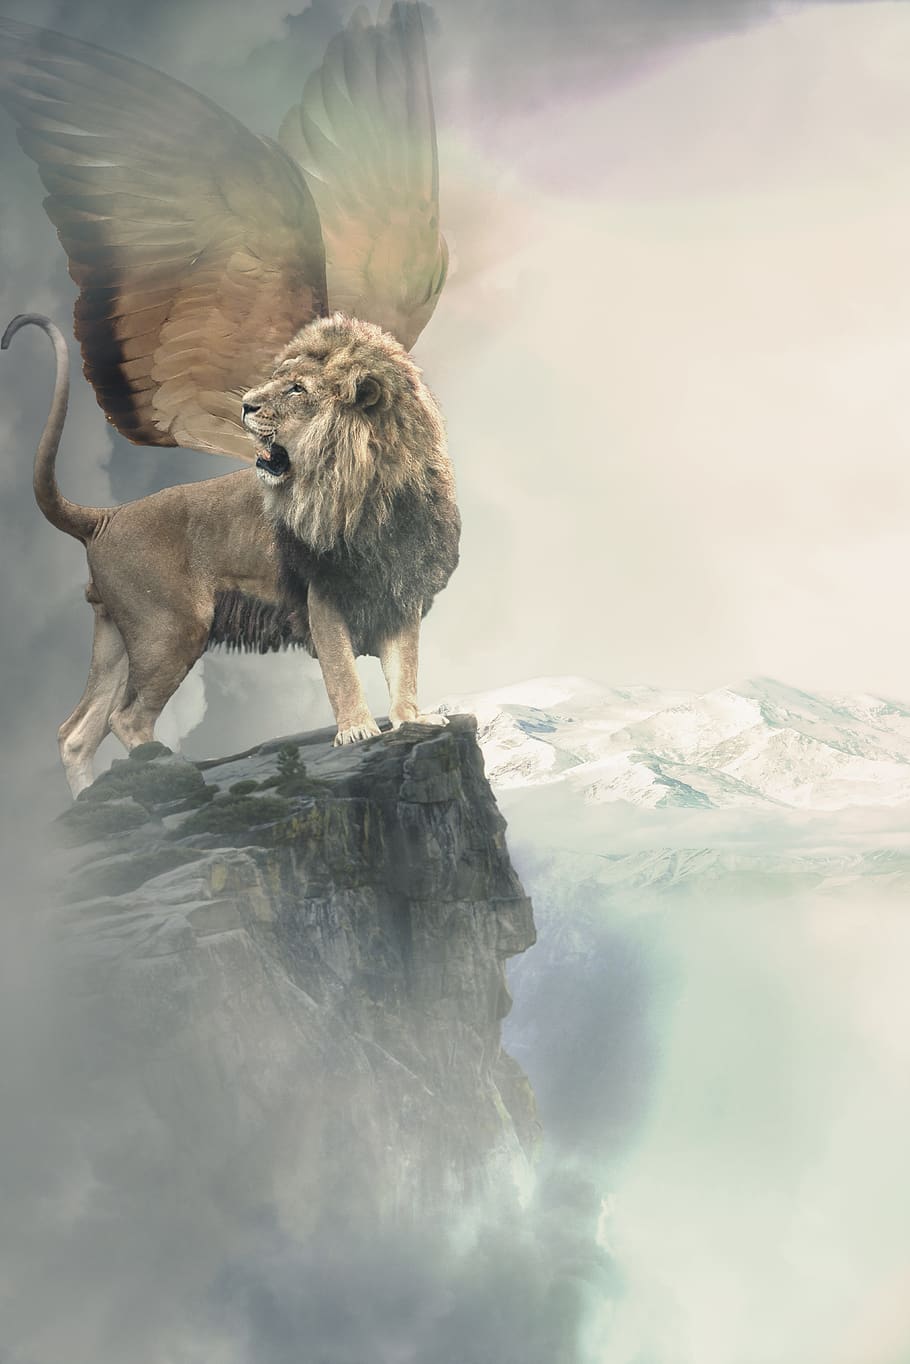 lion, wing, winged lion, mythology, rock, mountains, mythical creatures, composing, image editing, cold temperature